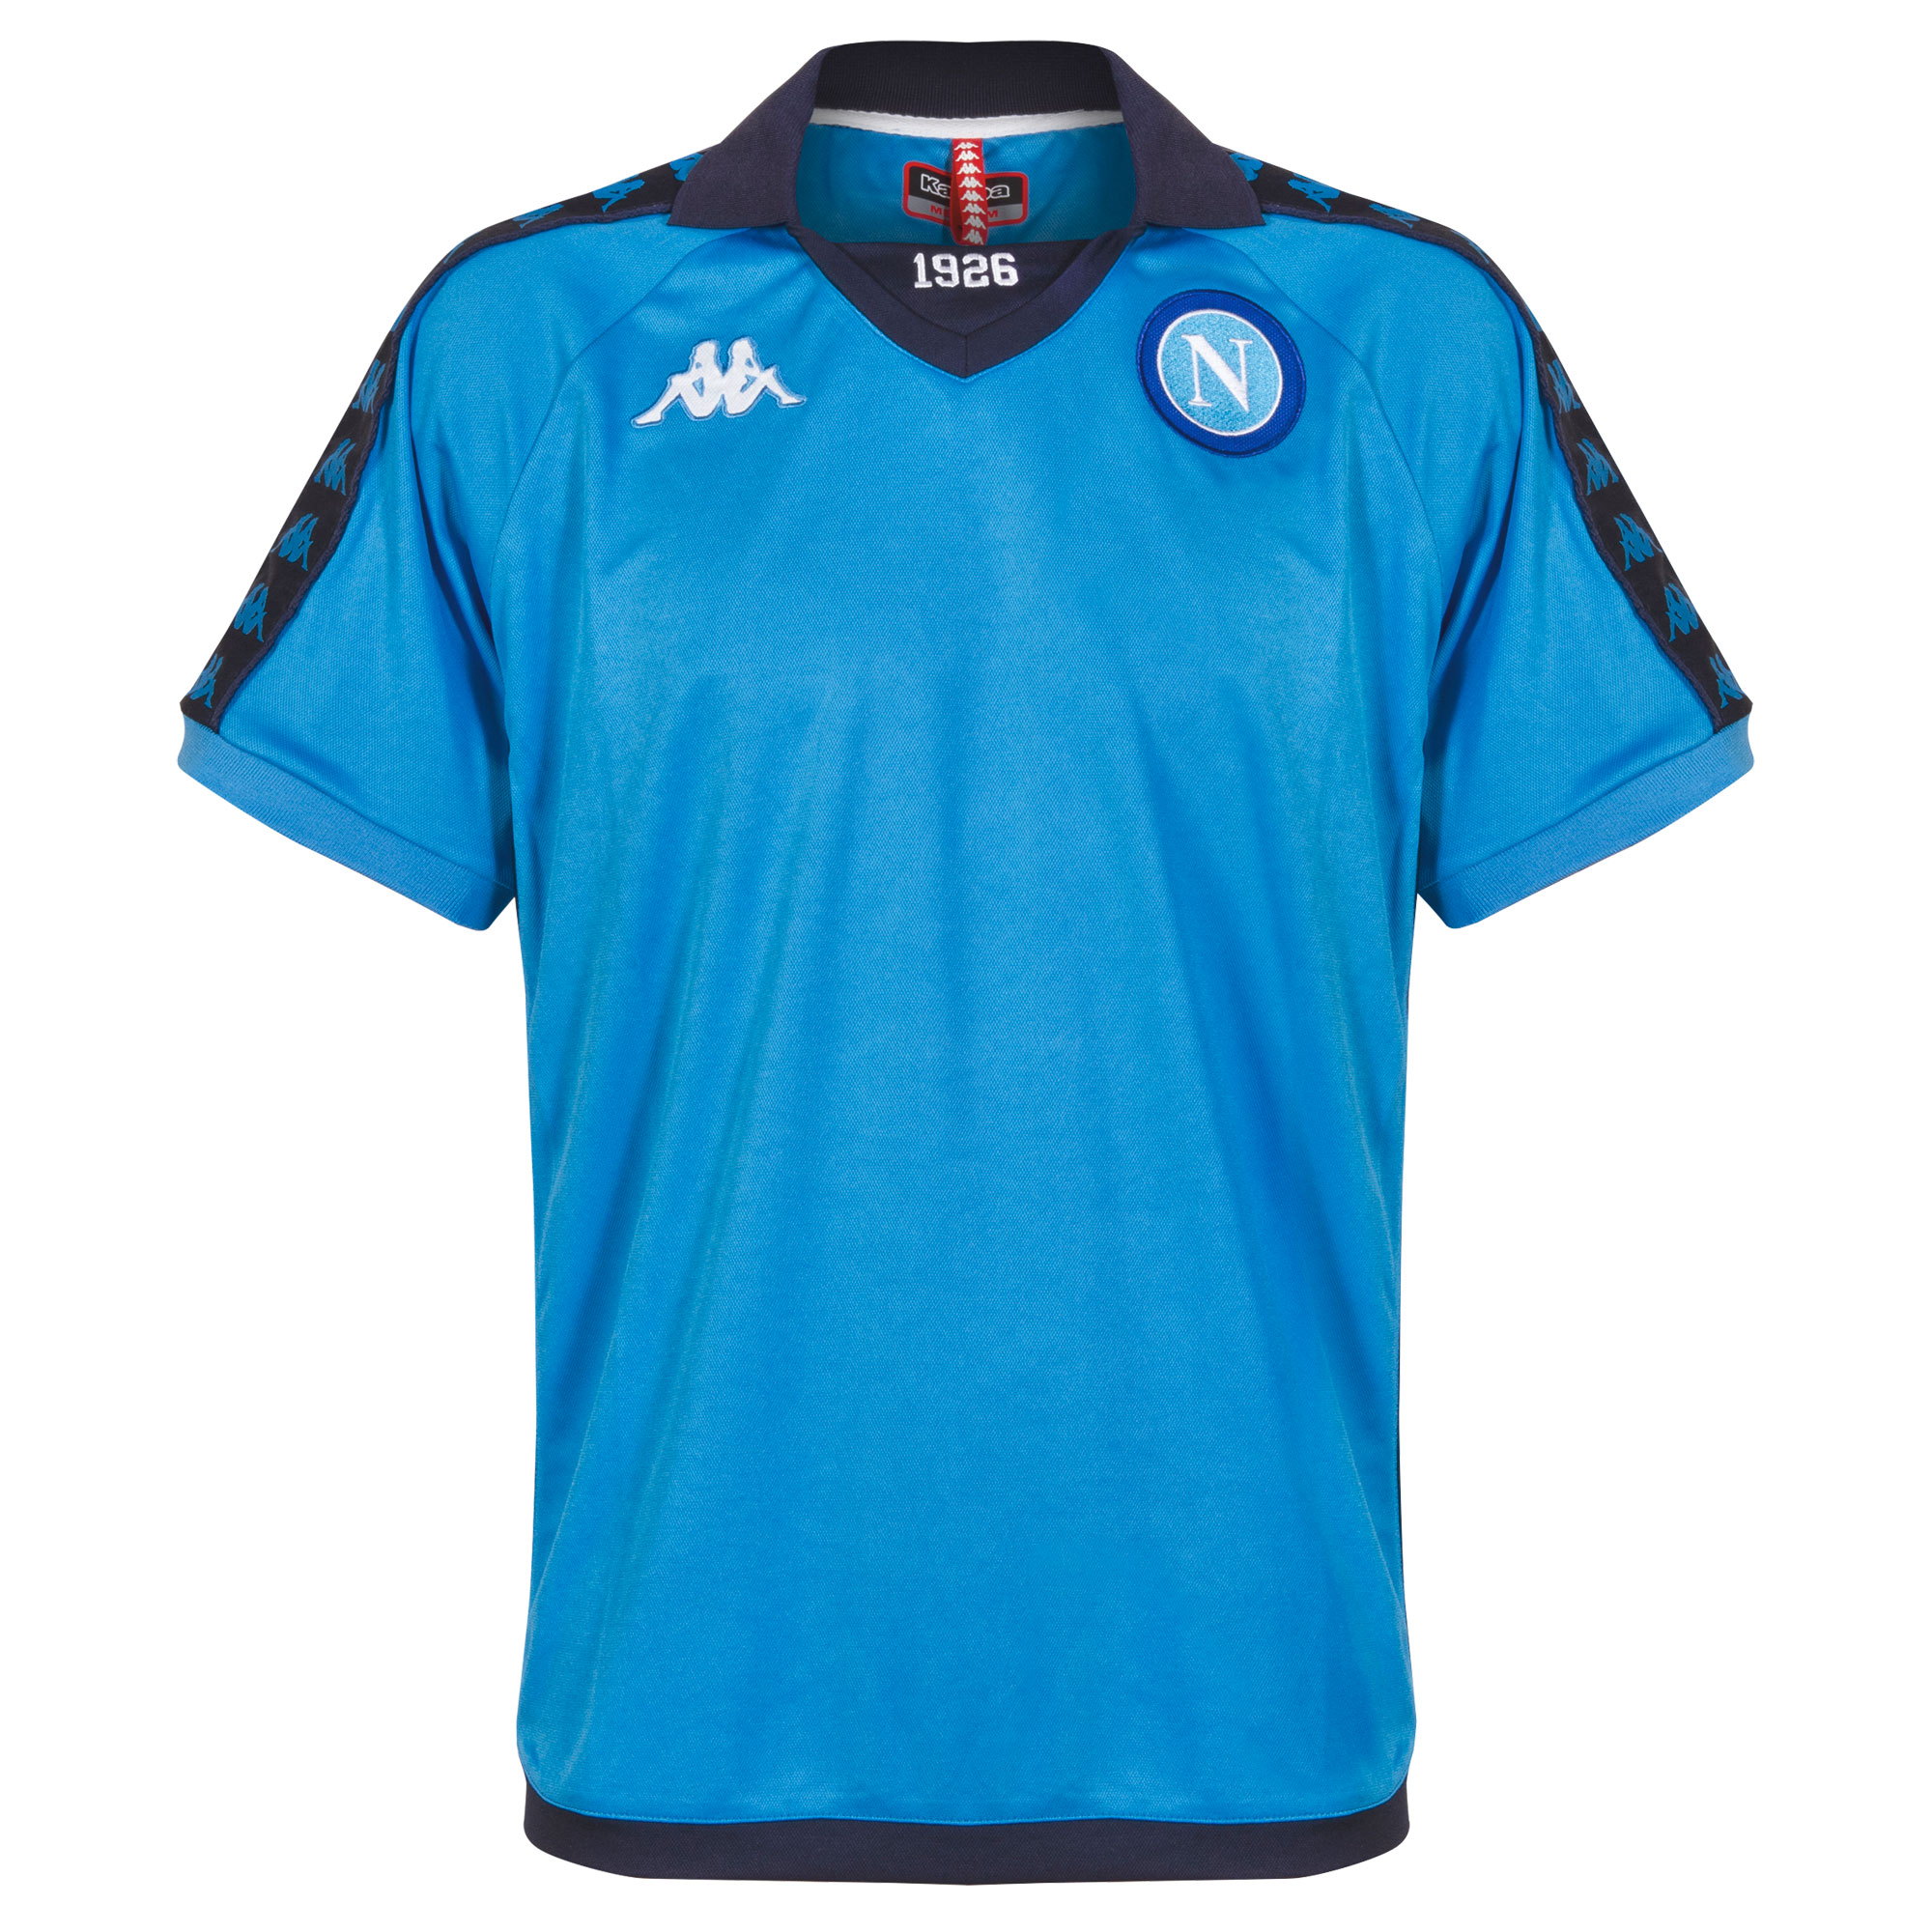 Buy Retro Replica Napoli old fashioned football shirts and soccer jerseys.